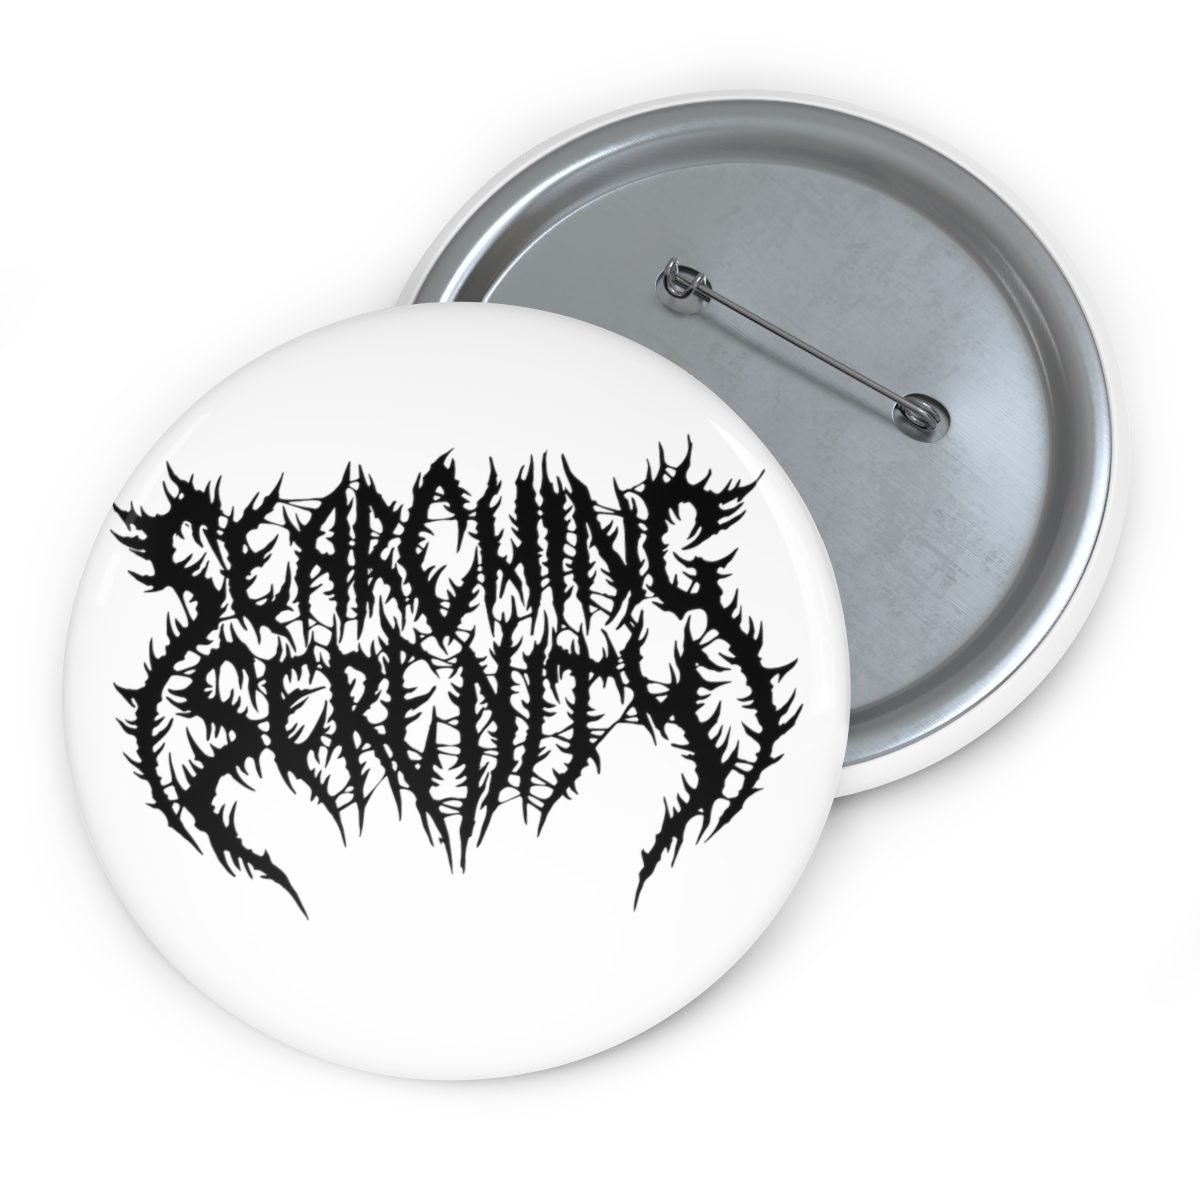 Searching Serenity – White Pin Buttons